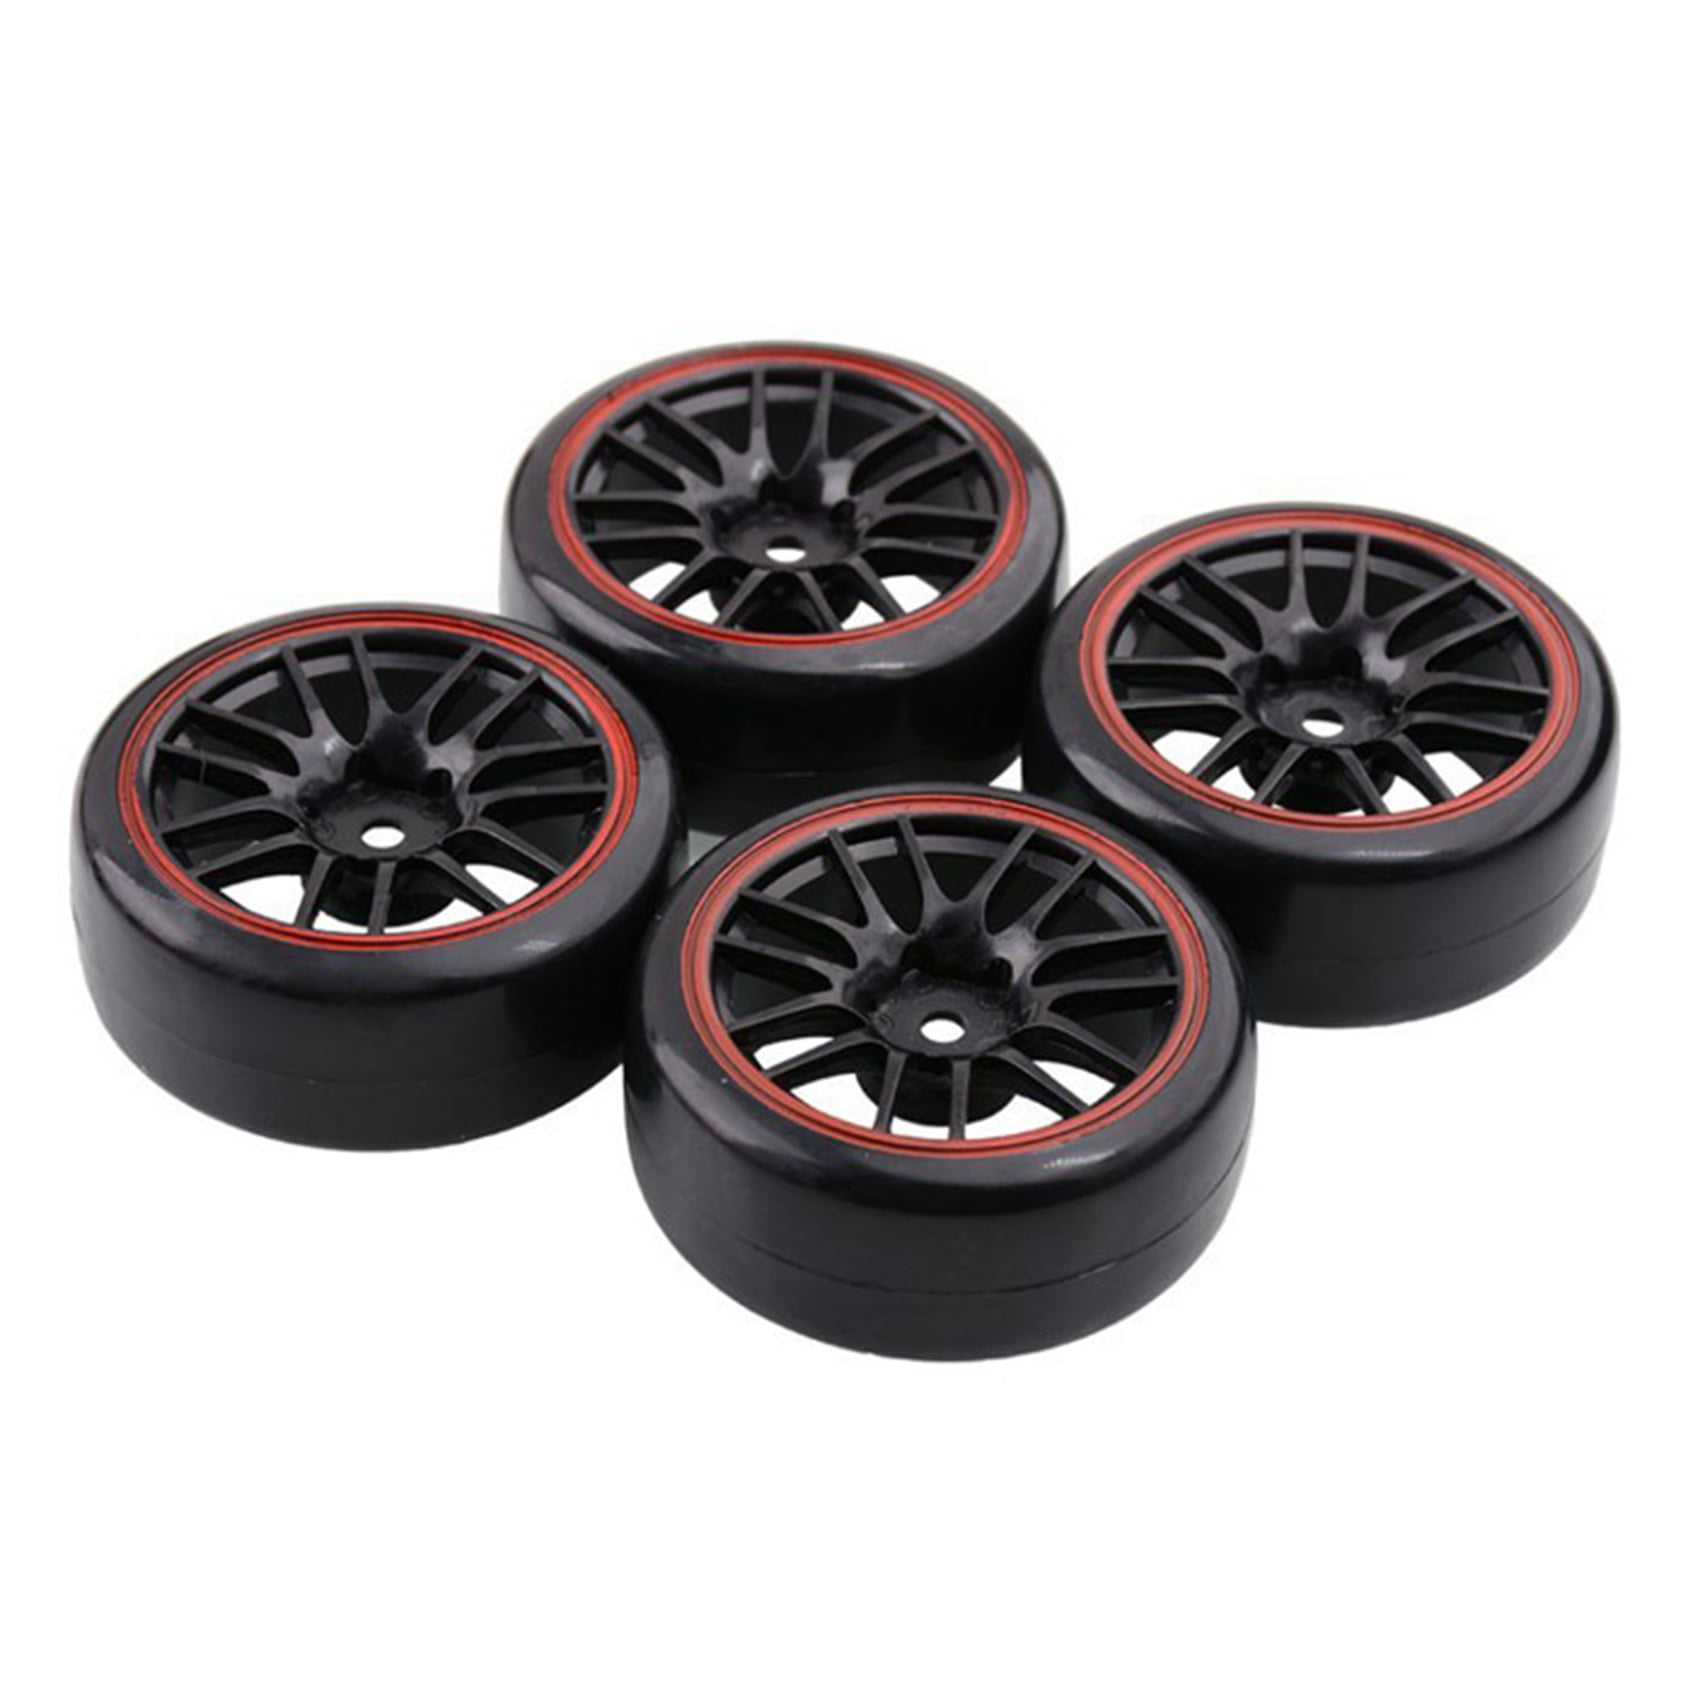 Red Pre-Glued Hard Plastic Tyres Wheels Rims for Traxxas Tamiya HSP HPI Kyosho 1:10 RC On-Road Drifting Car LAFEINA 1/10 Drift Car Tire and Wheel Set 